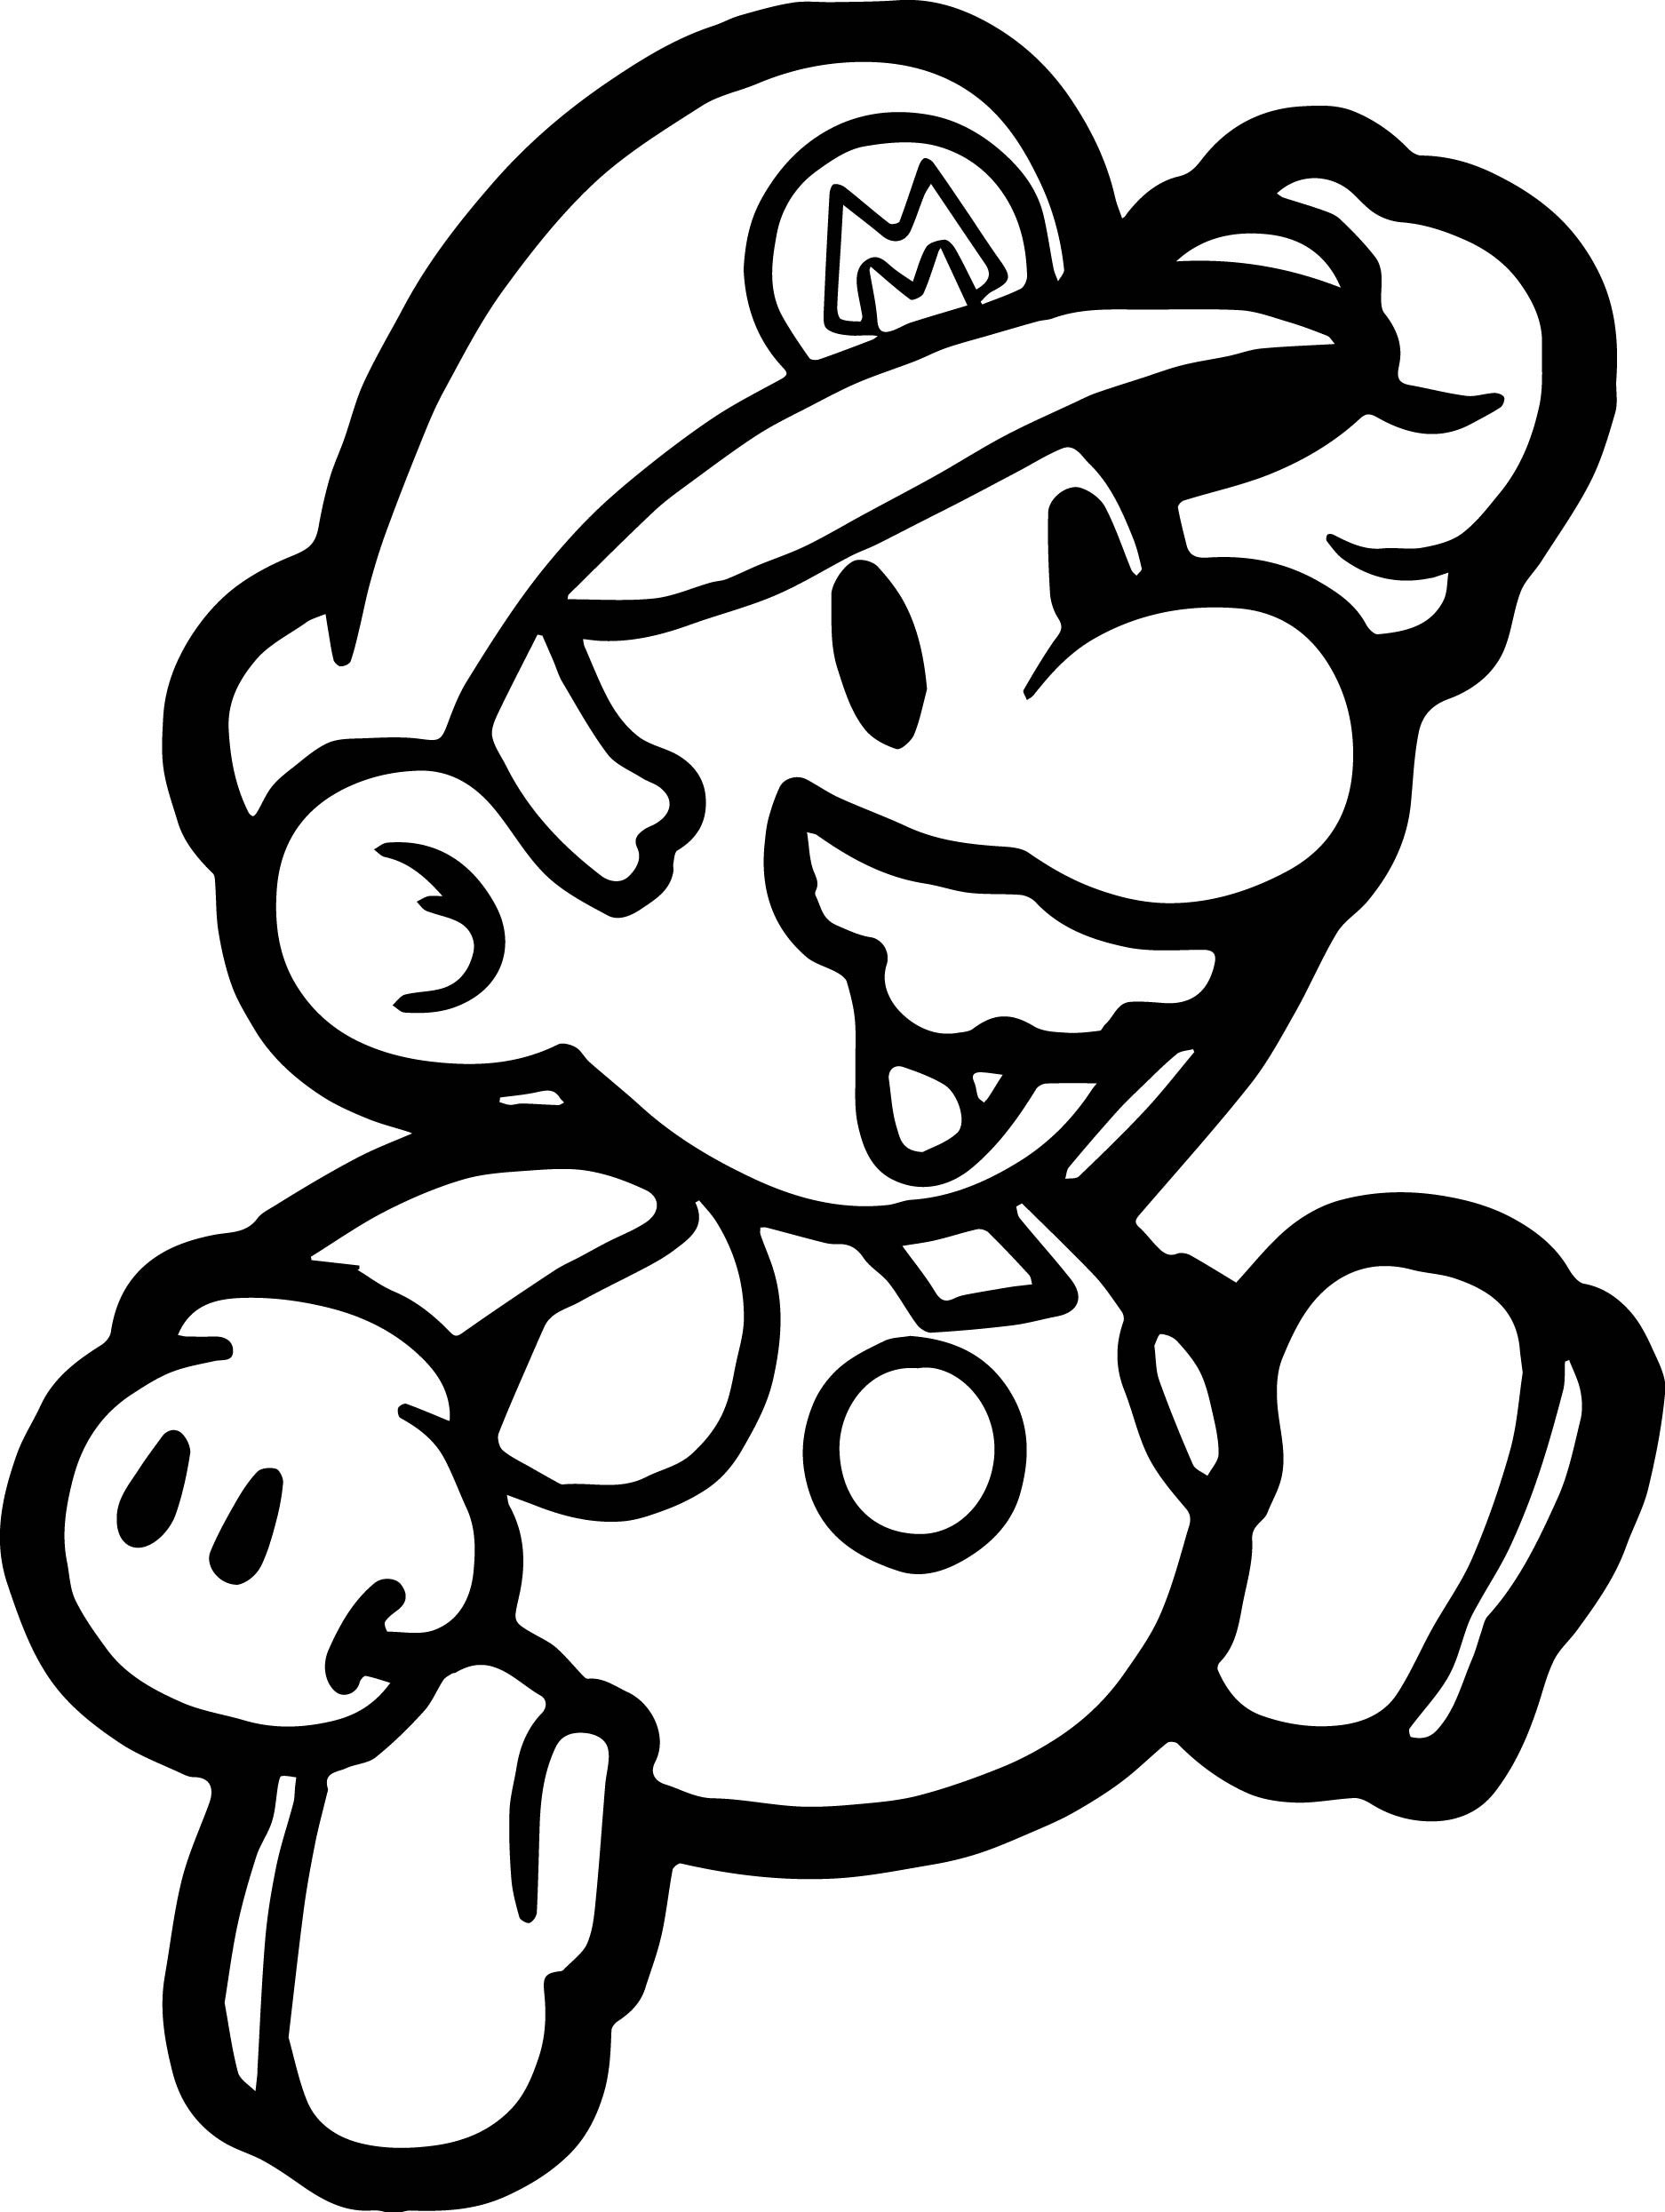 Super Paper Mario Coloring Pages at GetColorings.com ...